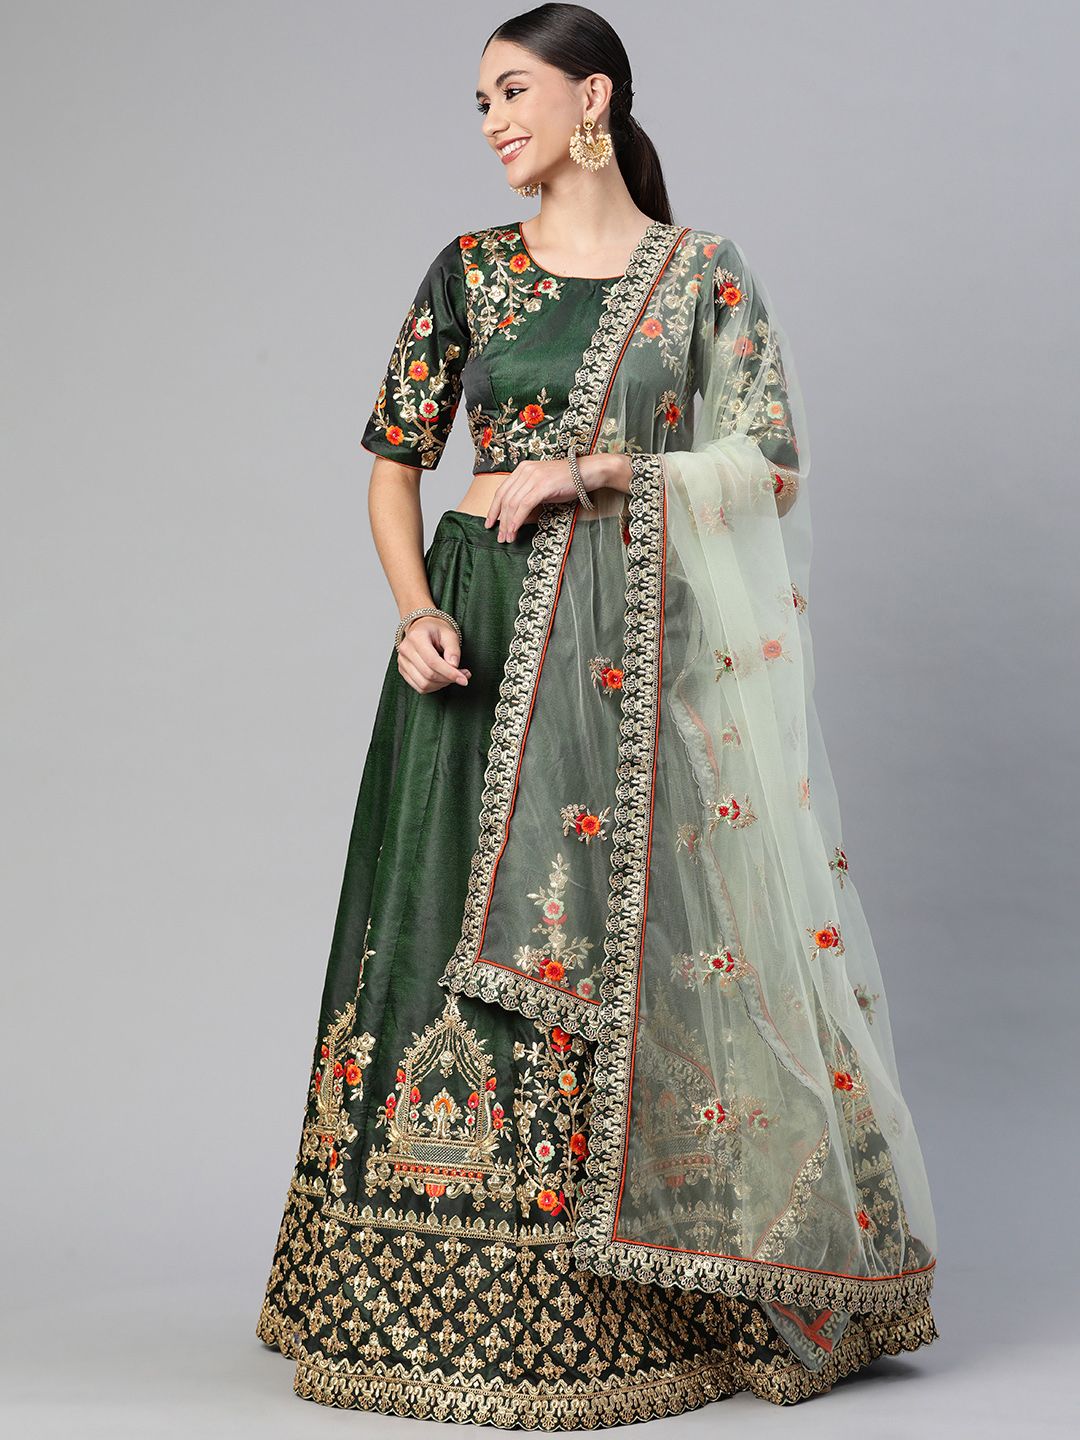 Readiprint Fashions Green & Golden Embroidered Unstitched Lehenga & Blouse With Dupatta Price in India